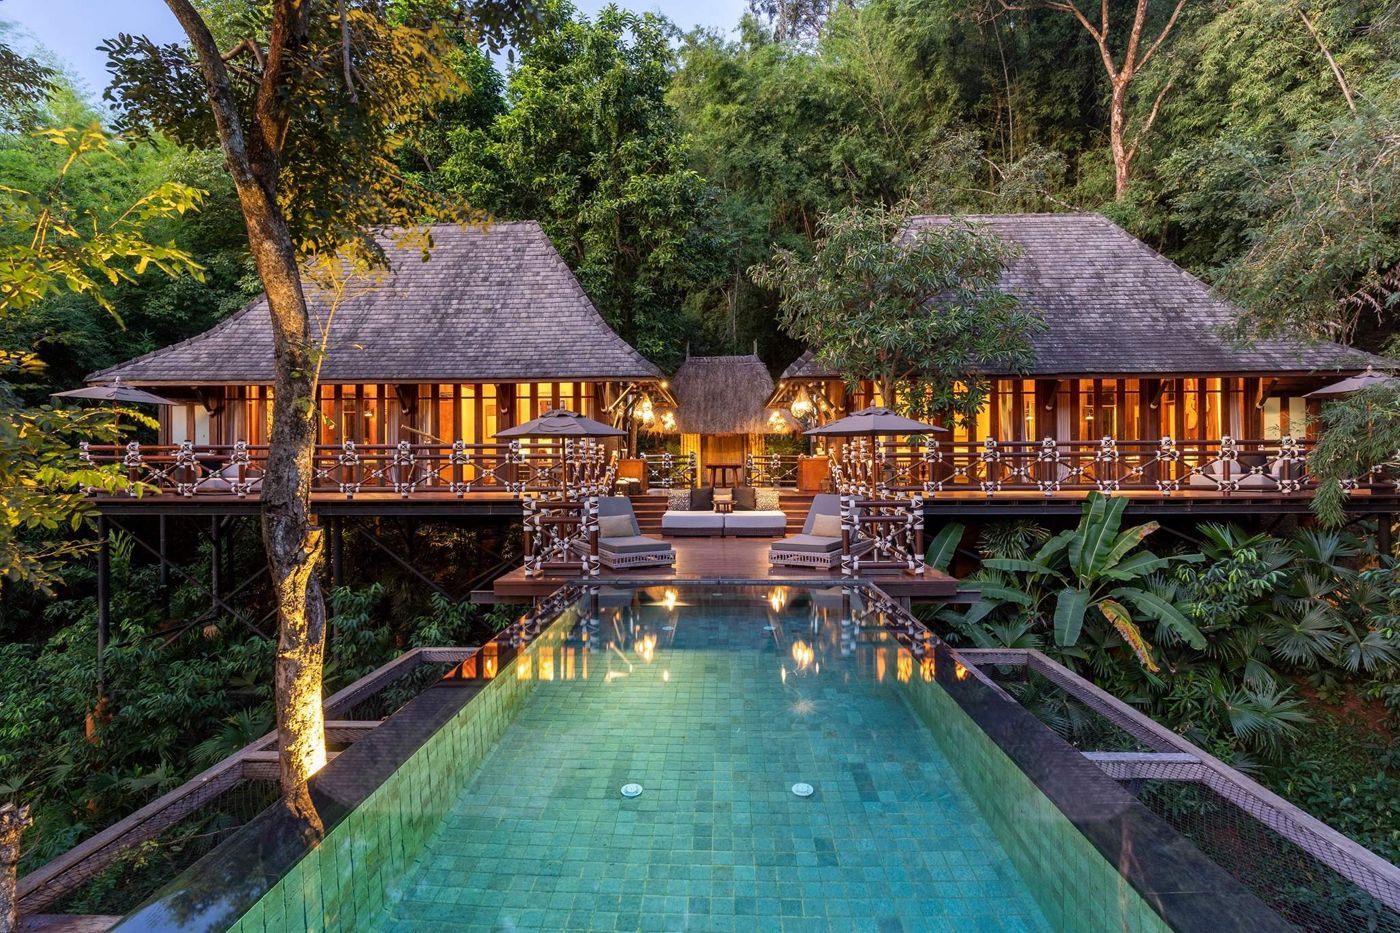 The most romantic resorts for a honeymoon in Thailand